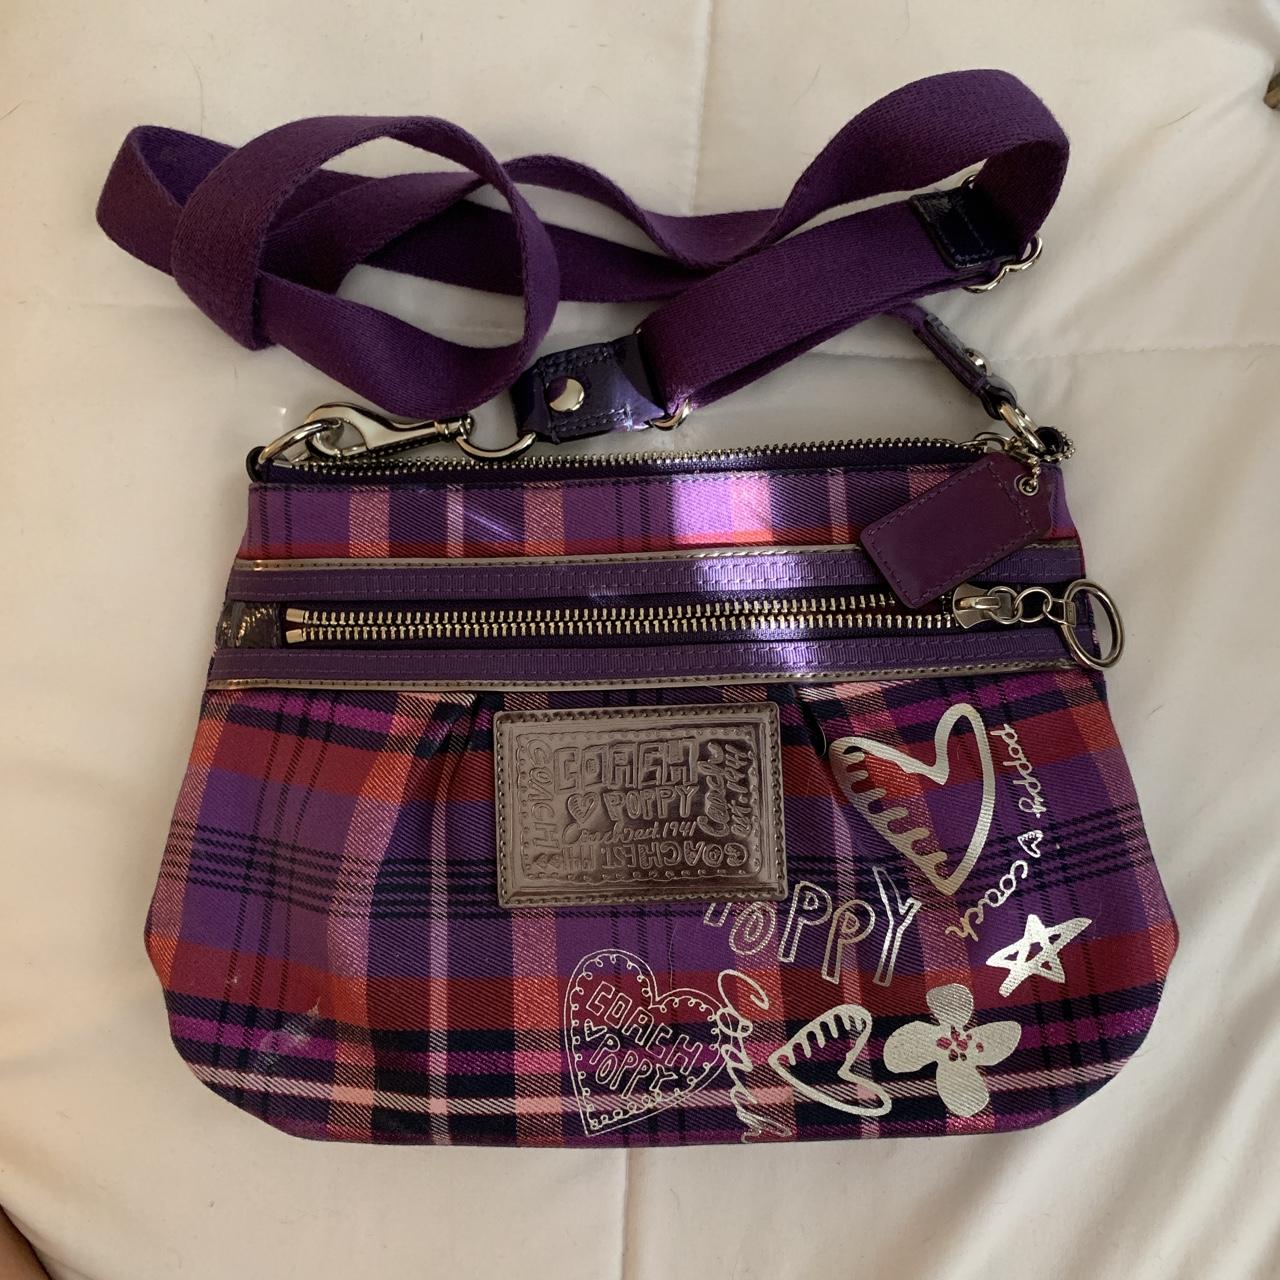 Buy the AUTHENTICATED Coach Purple Patent Leather Crossbody Bag |  GoodwillFinds